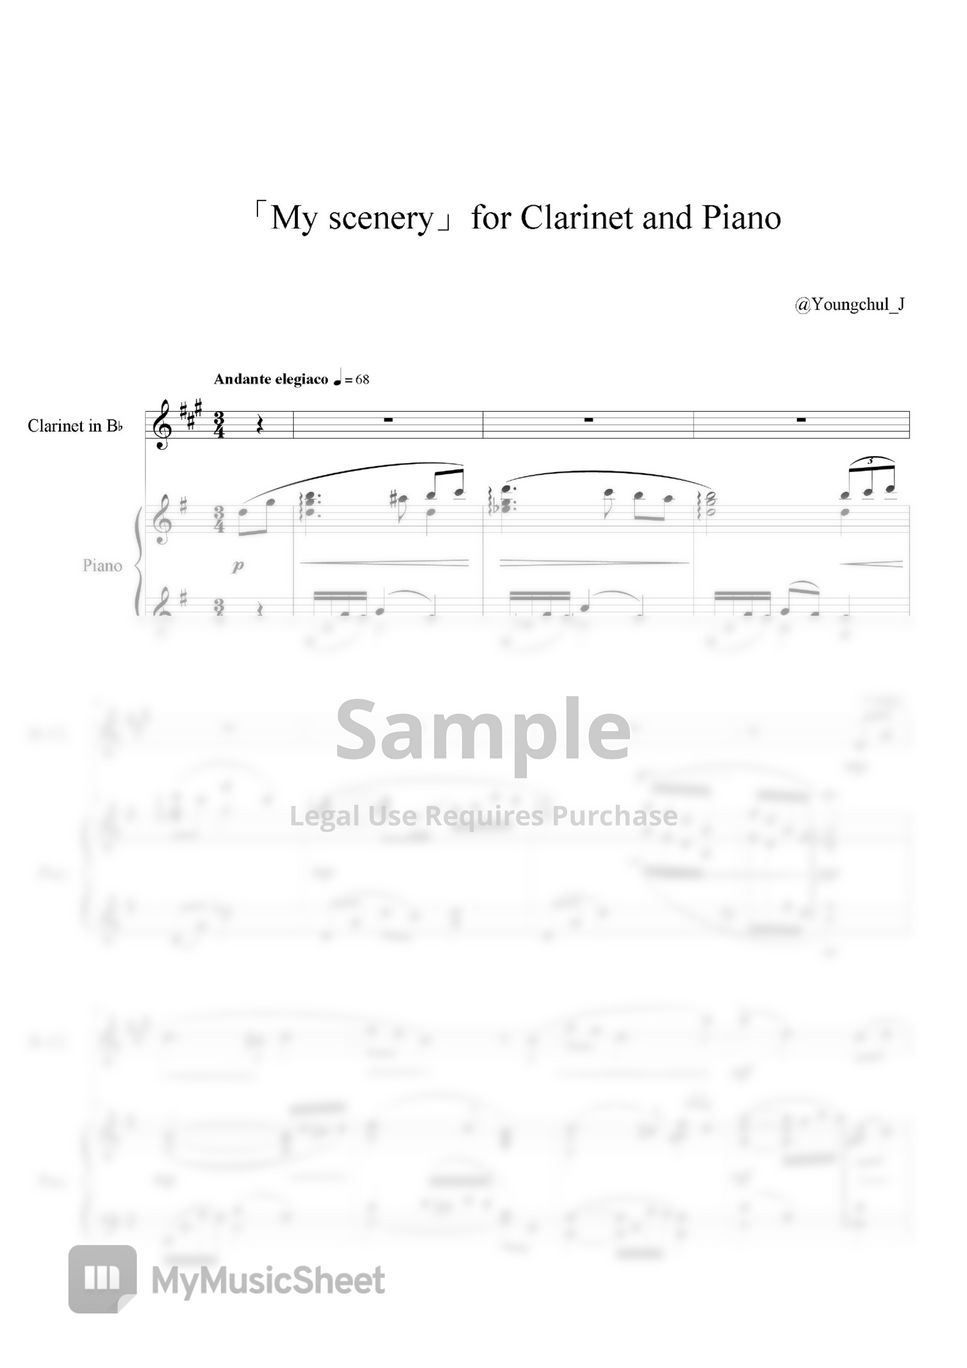 Youngchul Jang - 「My Scenery」 for Clarinet and Piano (Clarinet Piano duet) by Youngchul Jang